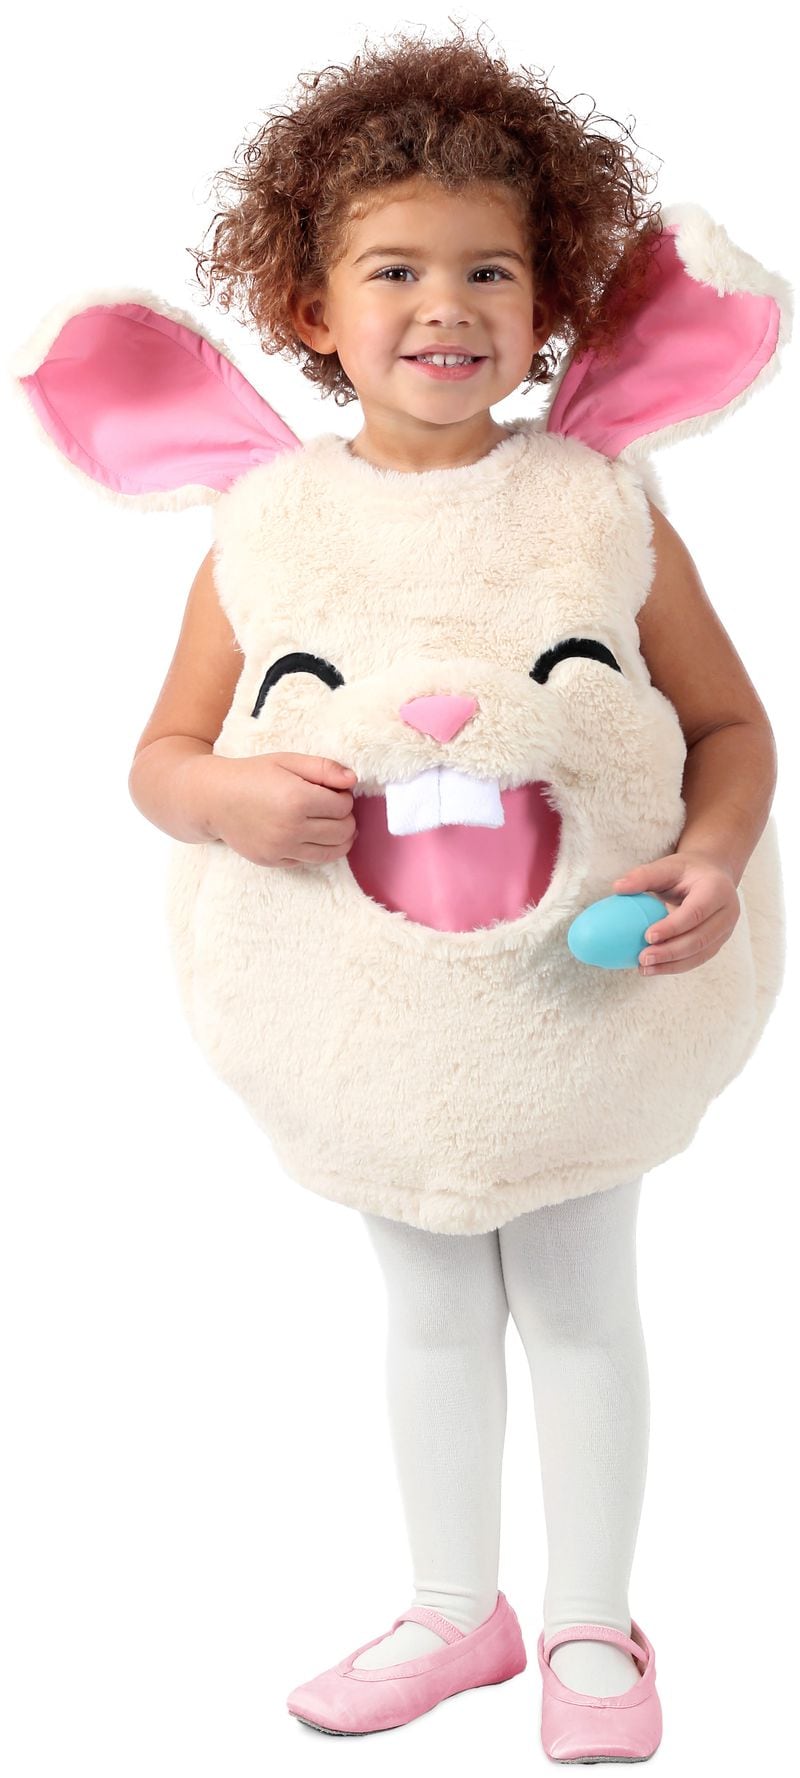 For all things Easter like costumes, accessories, signage colorful eggs and more, head to Party City.
Courtesy of Party City